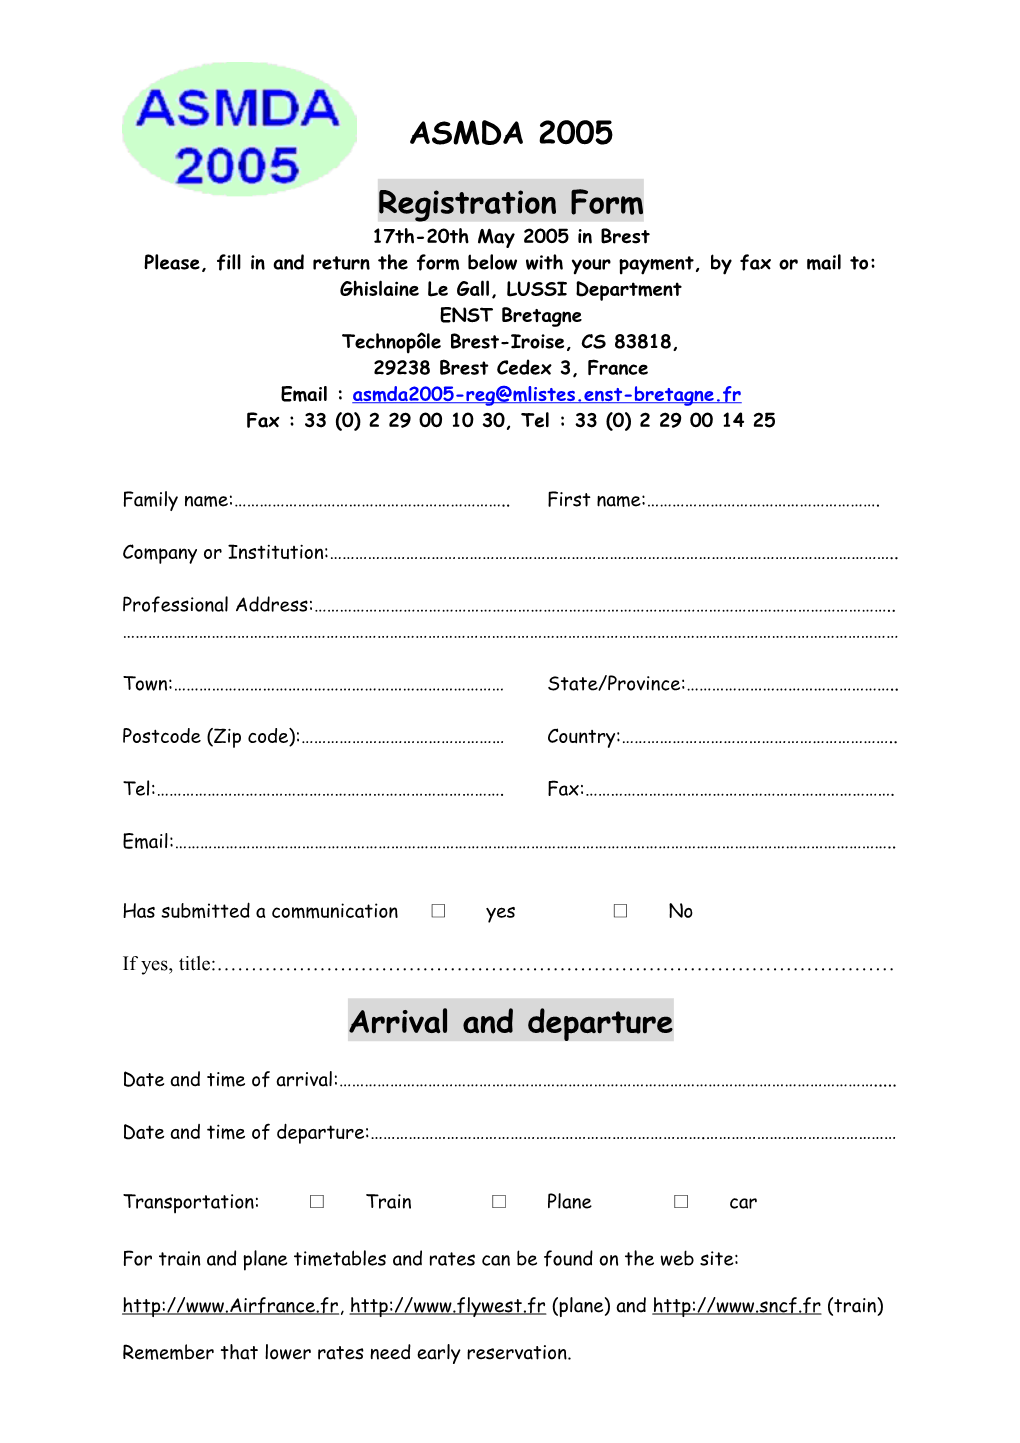 Please, Fill in and Return the Form Below with Your Payment, by Fax Or Mail To